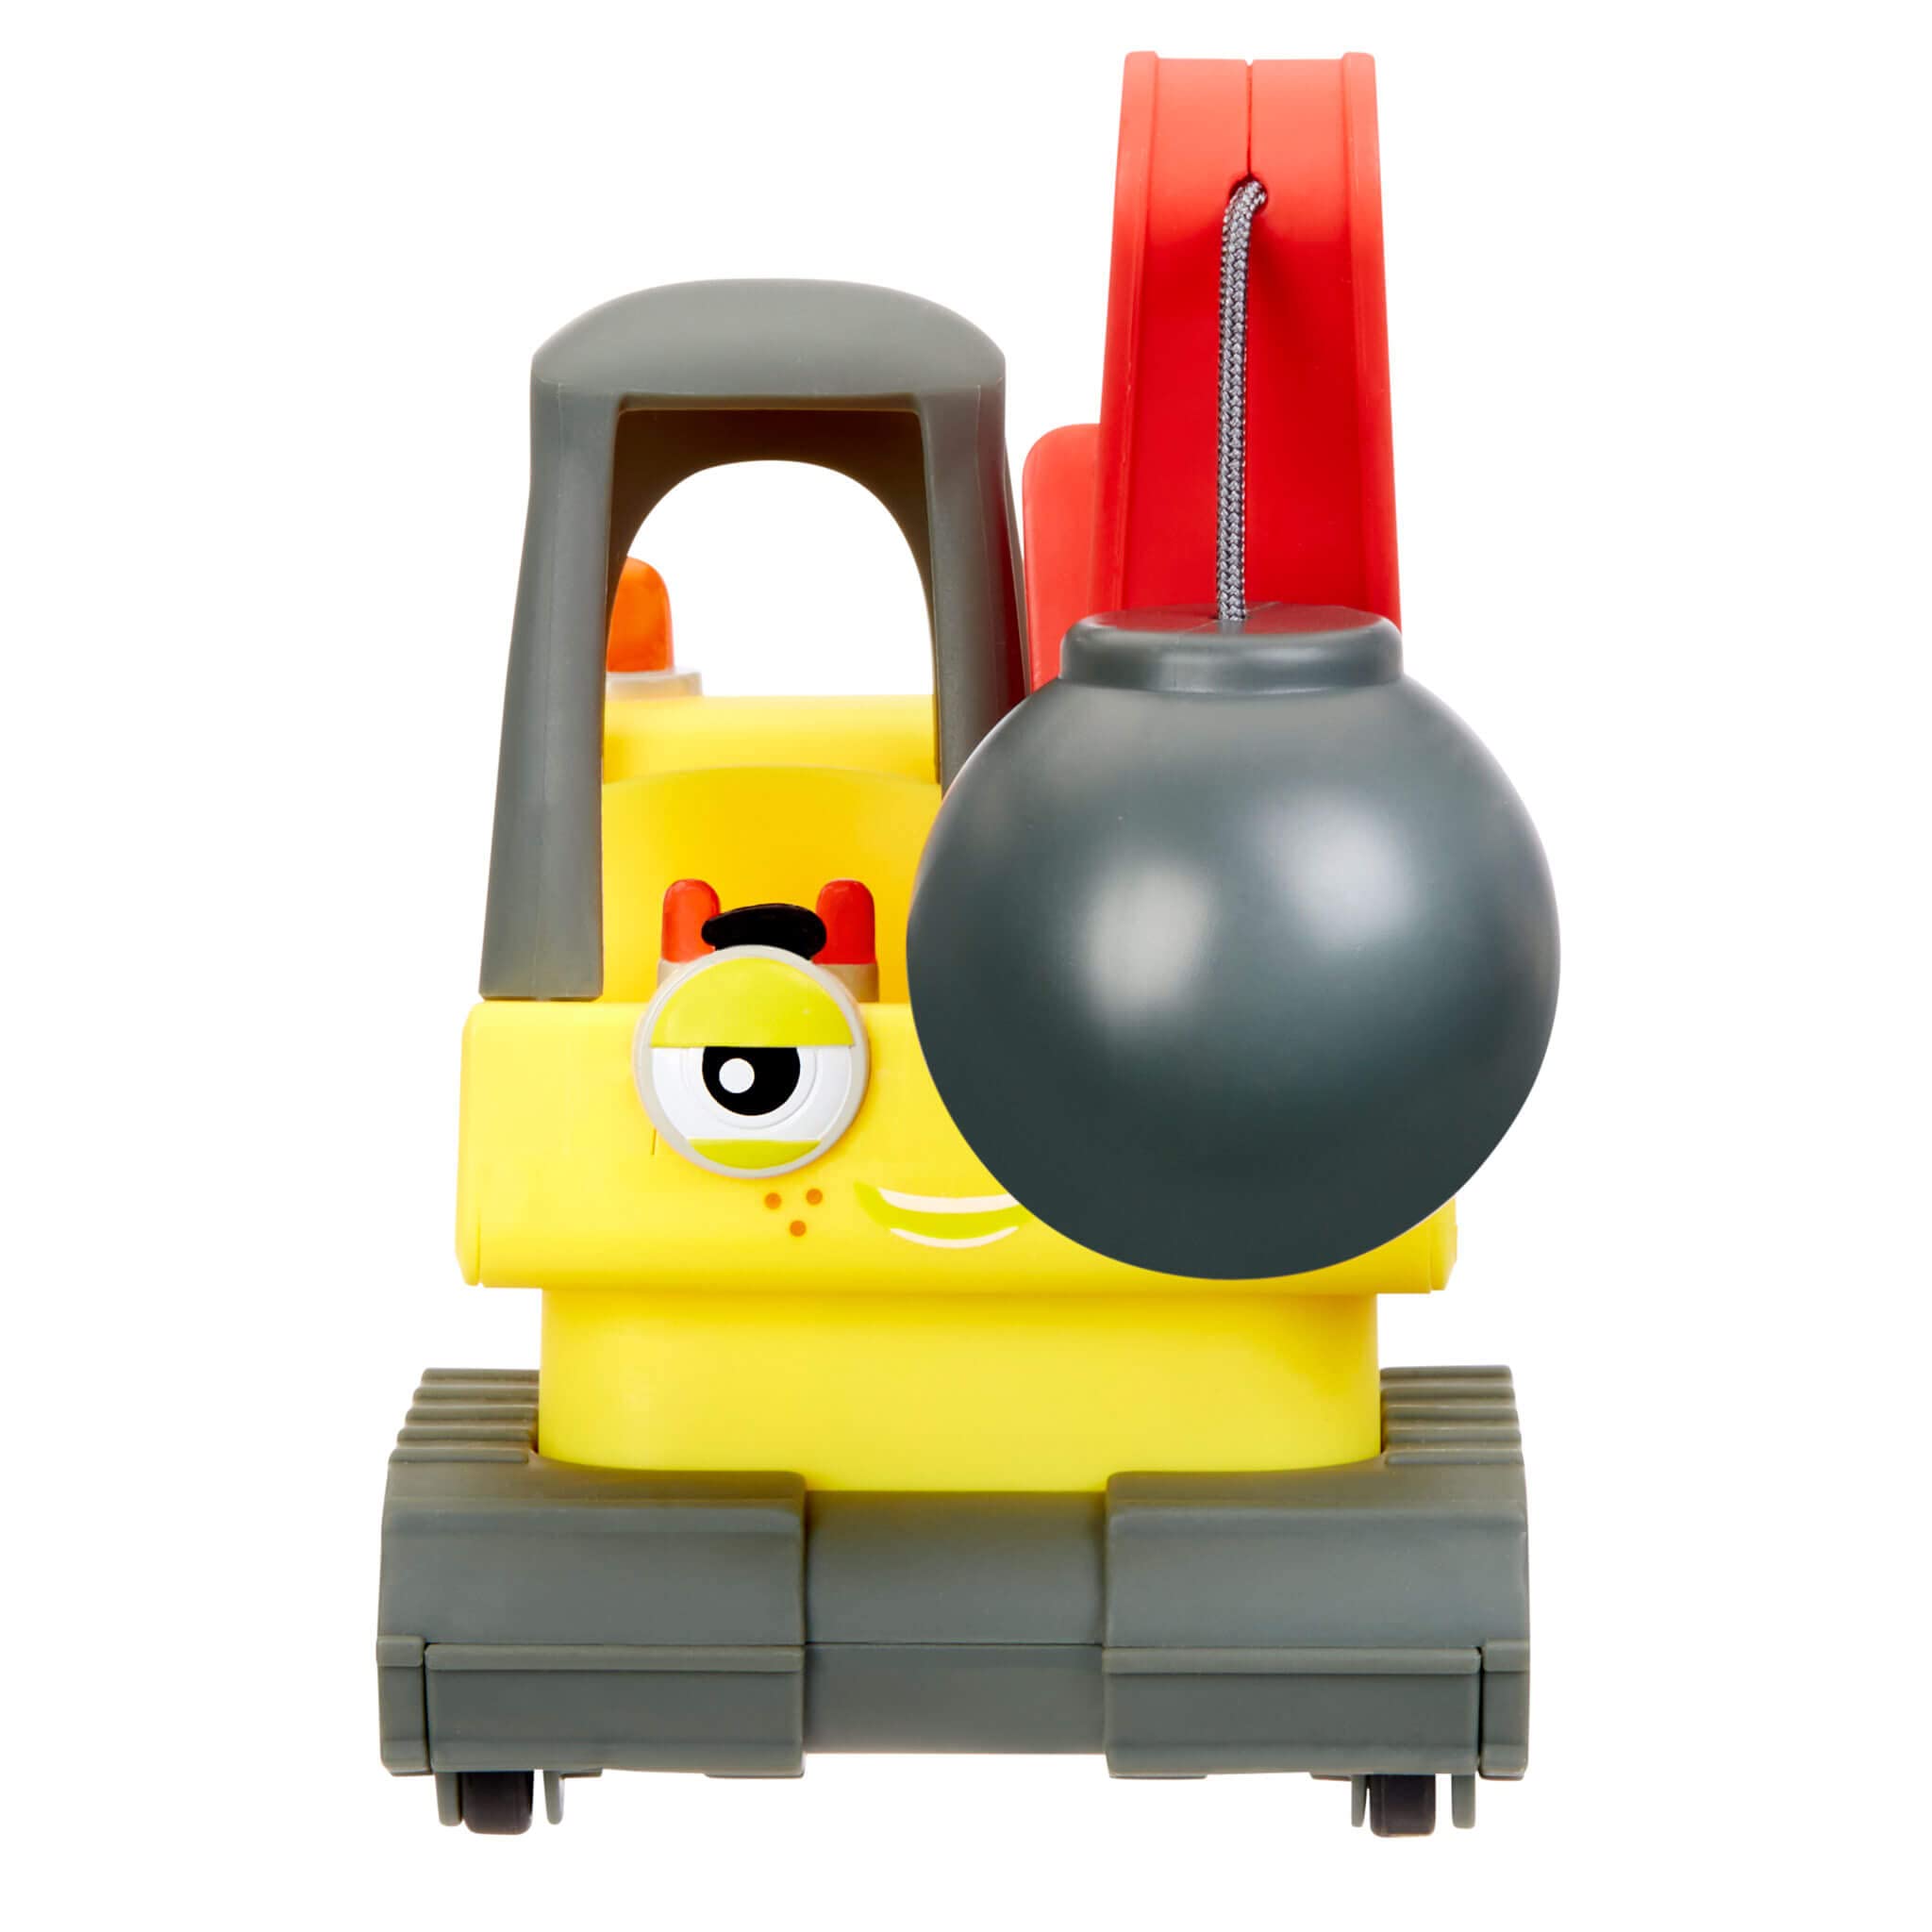 Let’s Go Cozy Coupe™ 3pk Construction Mini Push and Play Vehicle for Tabletop or Floor Push Play Car Fun and Color Change for Toddlers, Boys, Girls 3+ Years